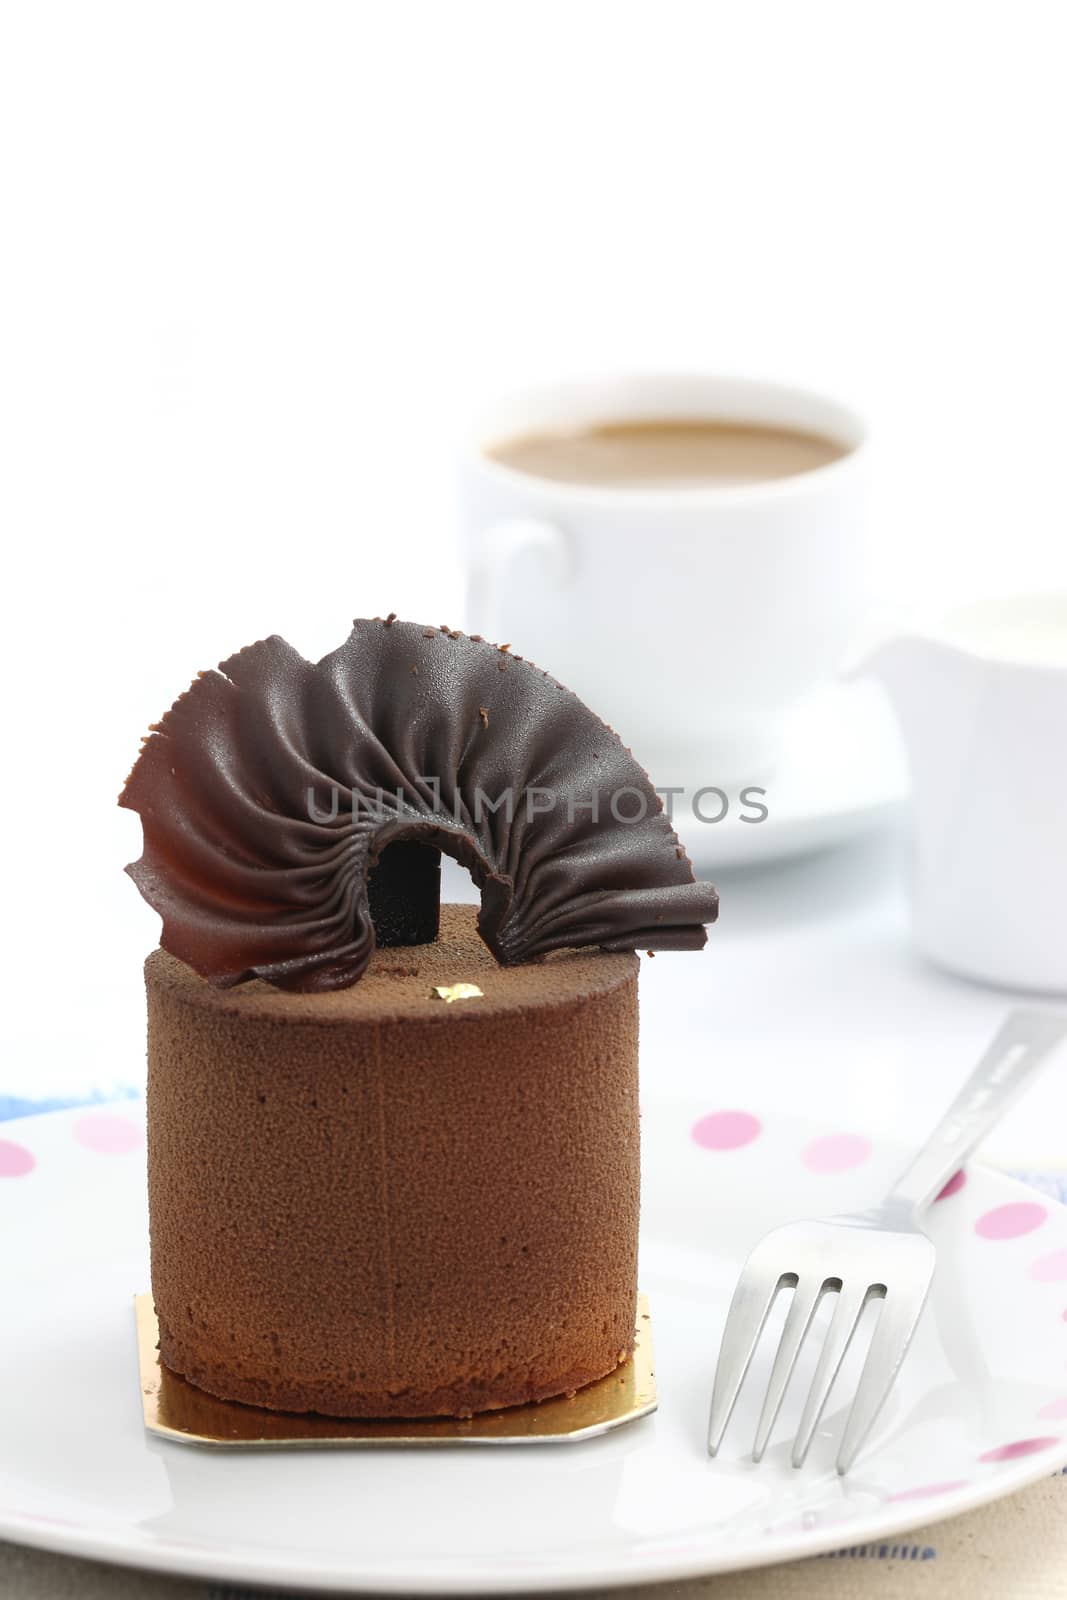 Chocolate Cake with coffee isolated in white background by piyato